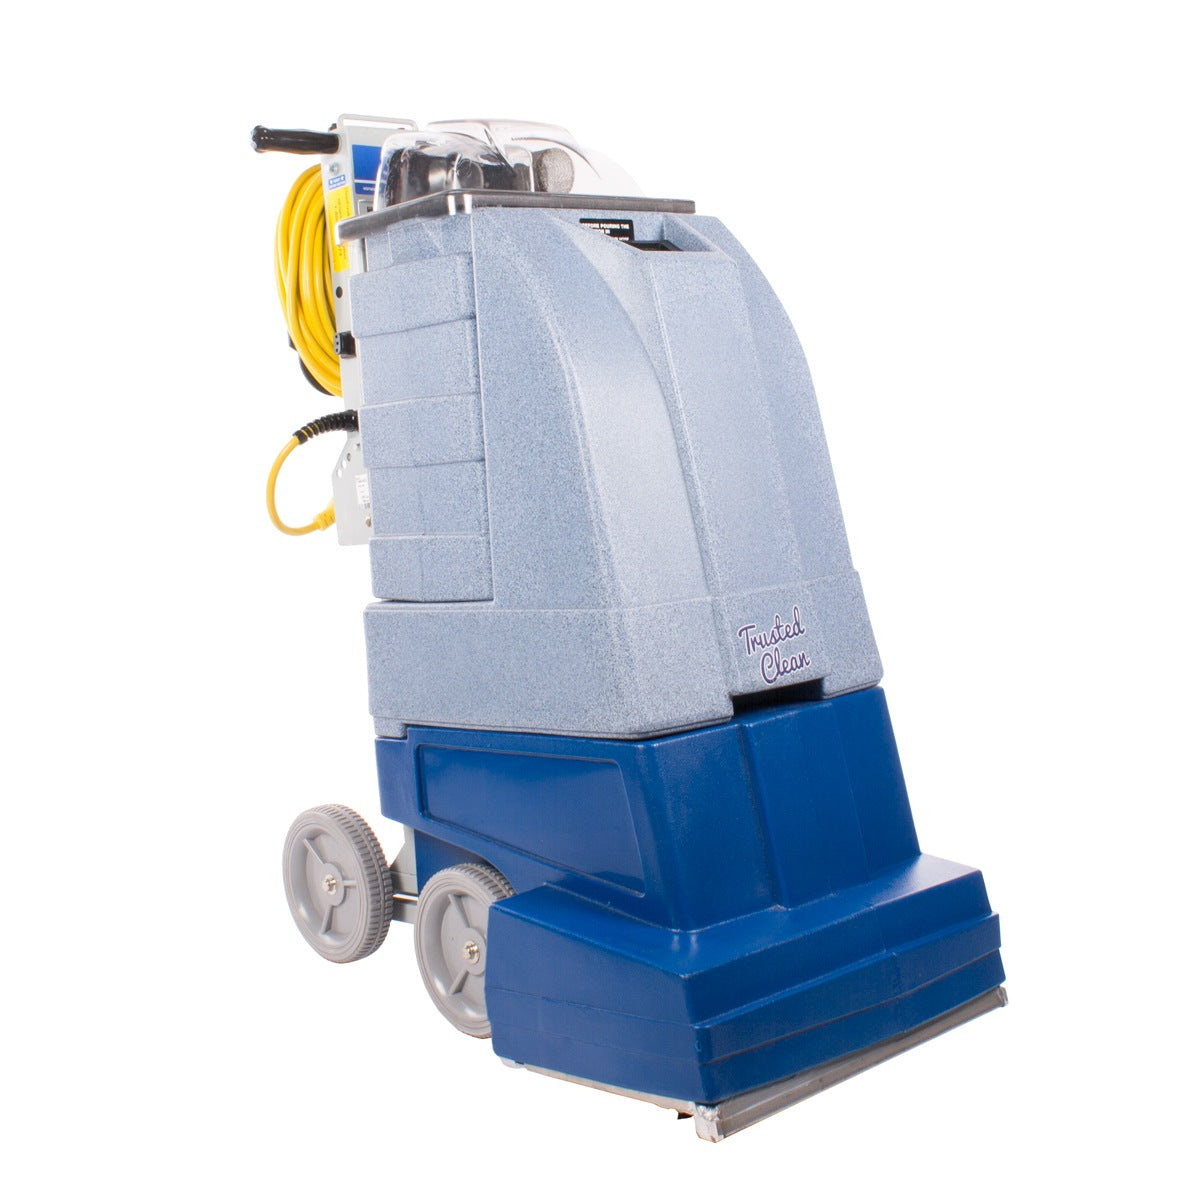 Carpet Vac Extractor Attachment-Tool Cleaning Vacuum Clear Upholstery Car  Detailing Turn Shop Vac Into an Extractor B 